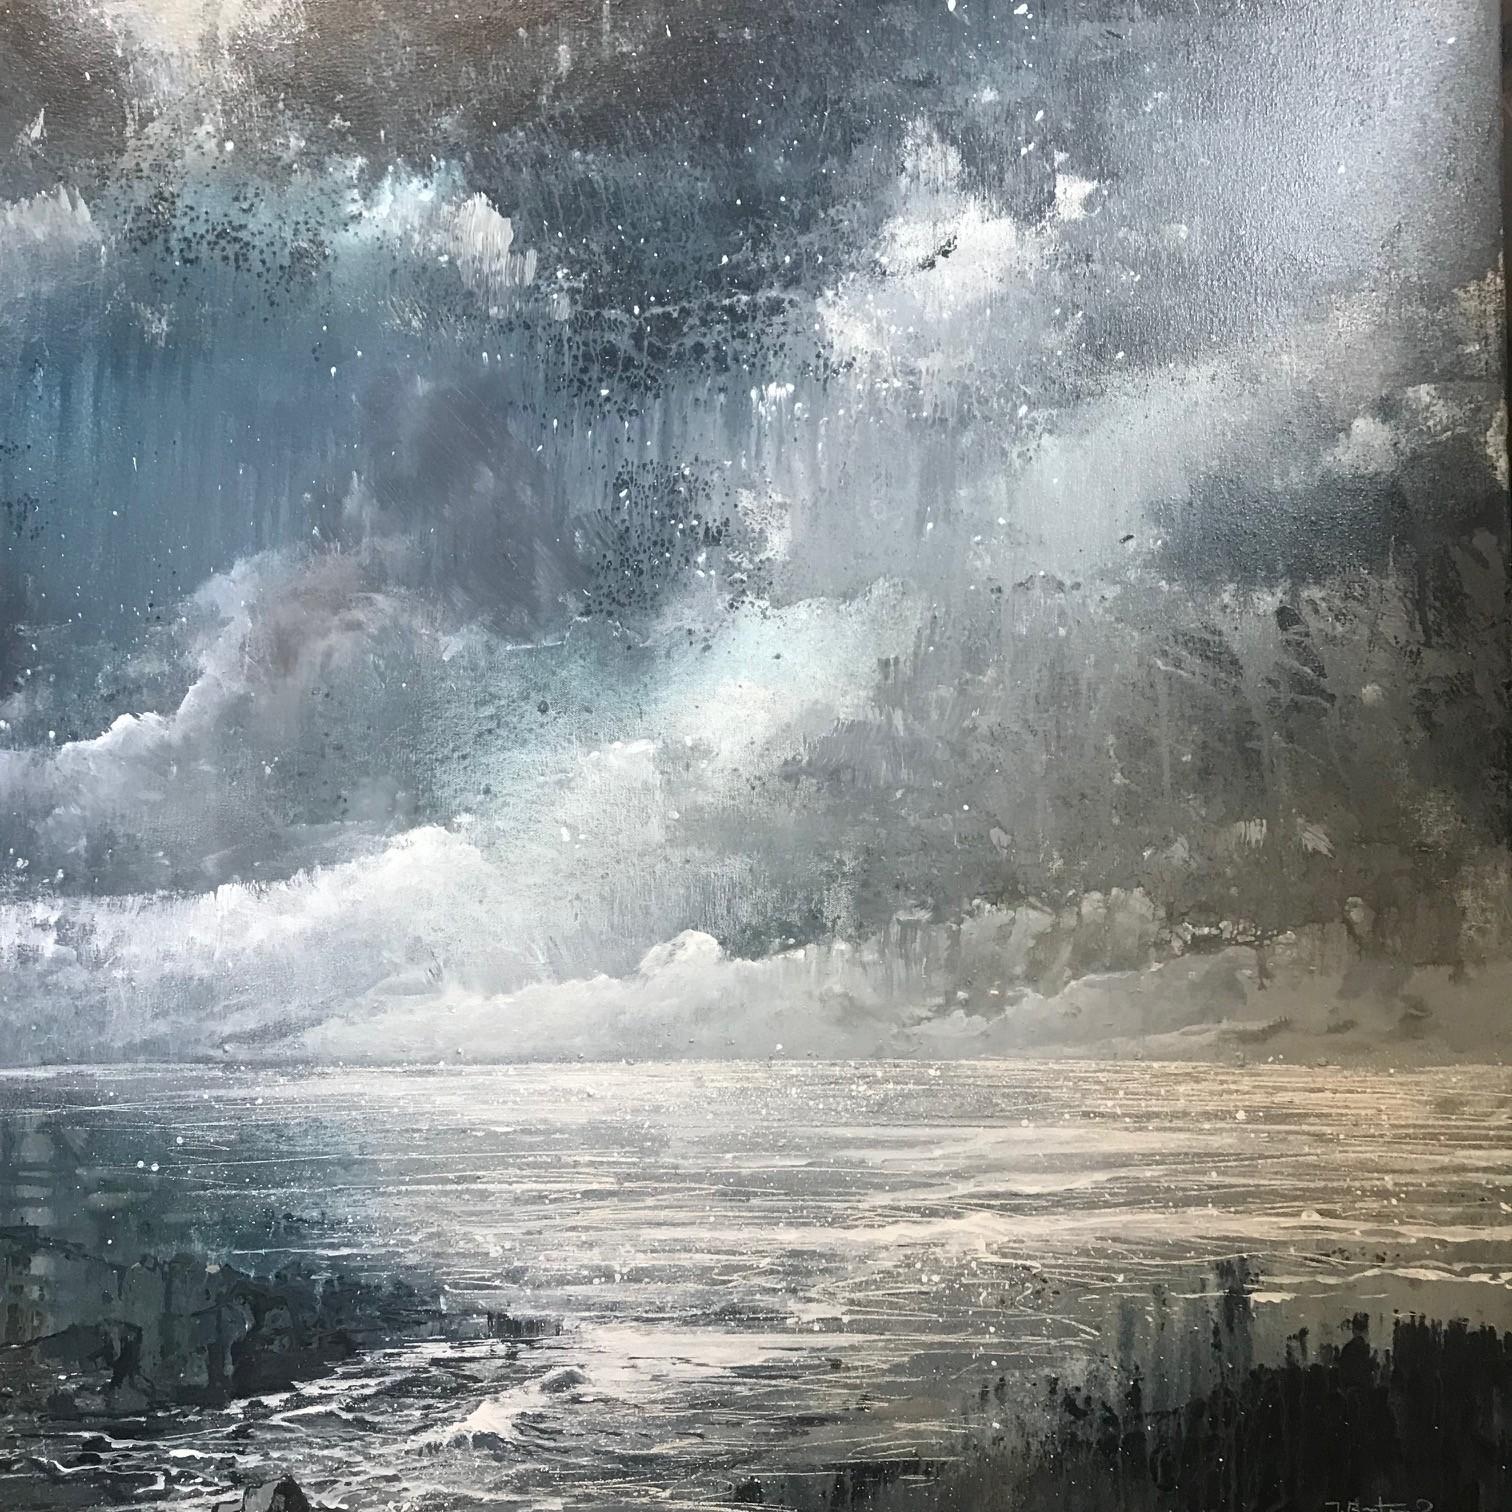 James Bonstow Abstract Painting - Darkness at the Coast, Original painting, Contemporary Seascape, Mixed media oil